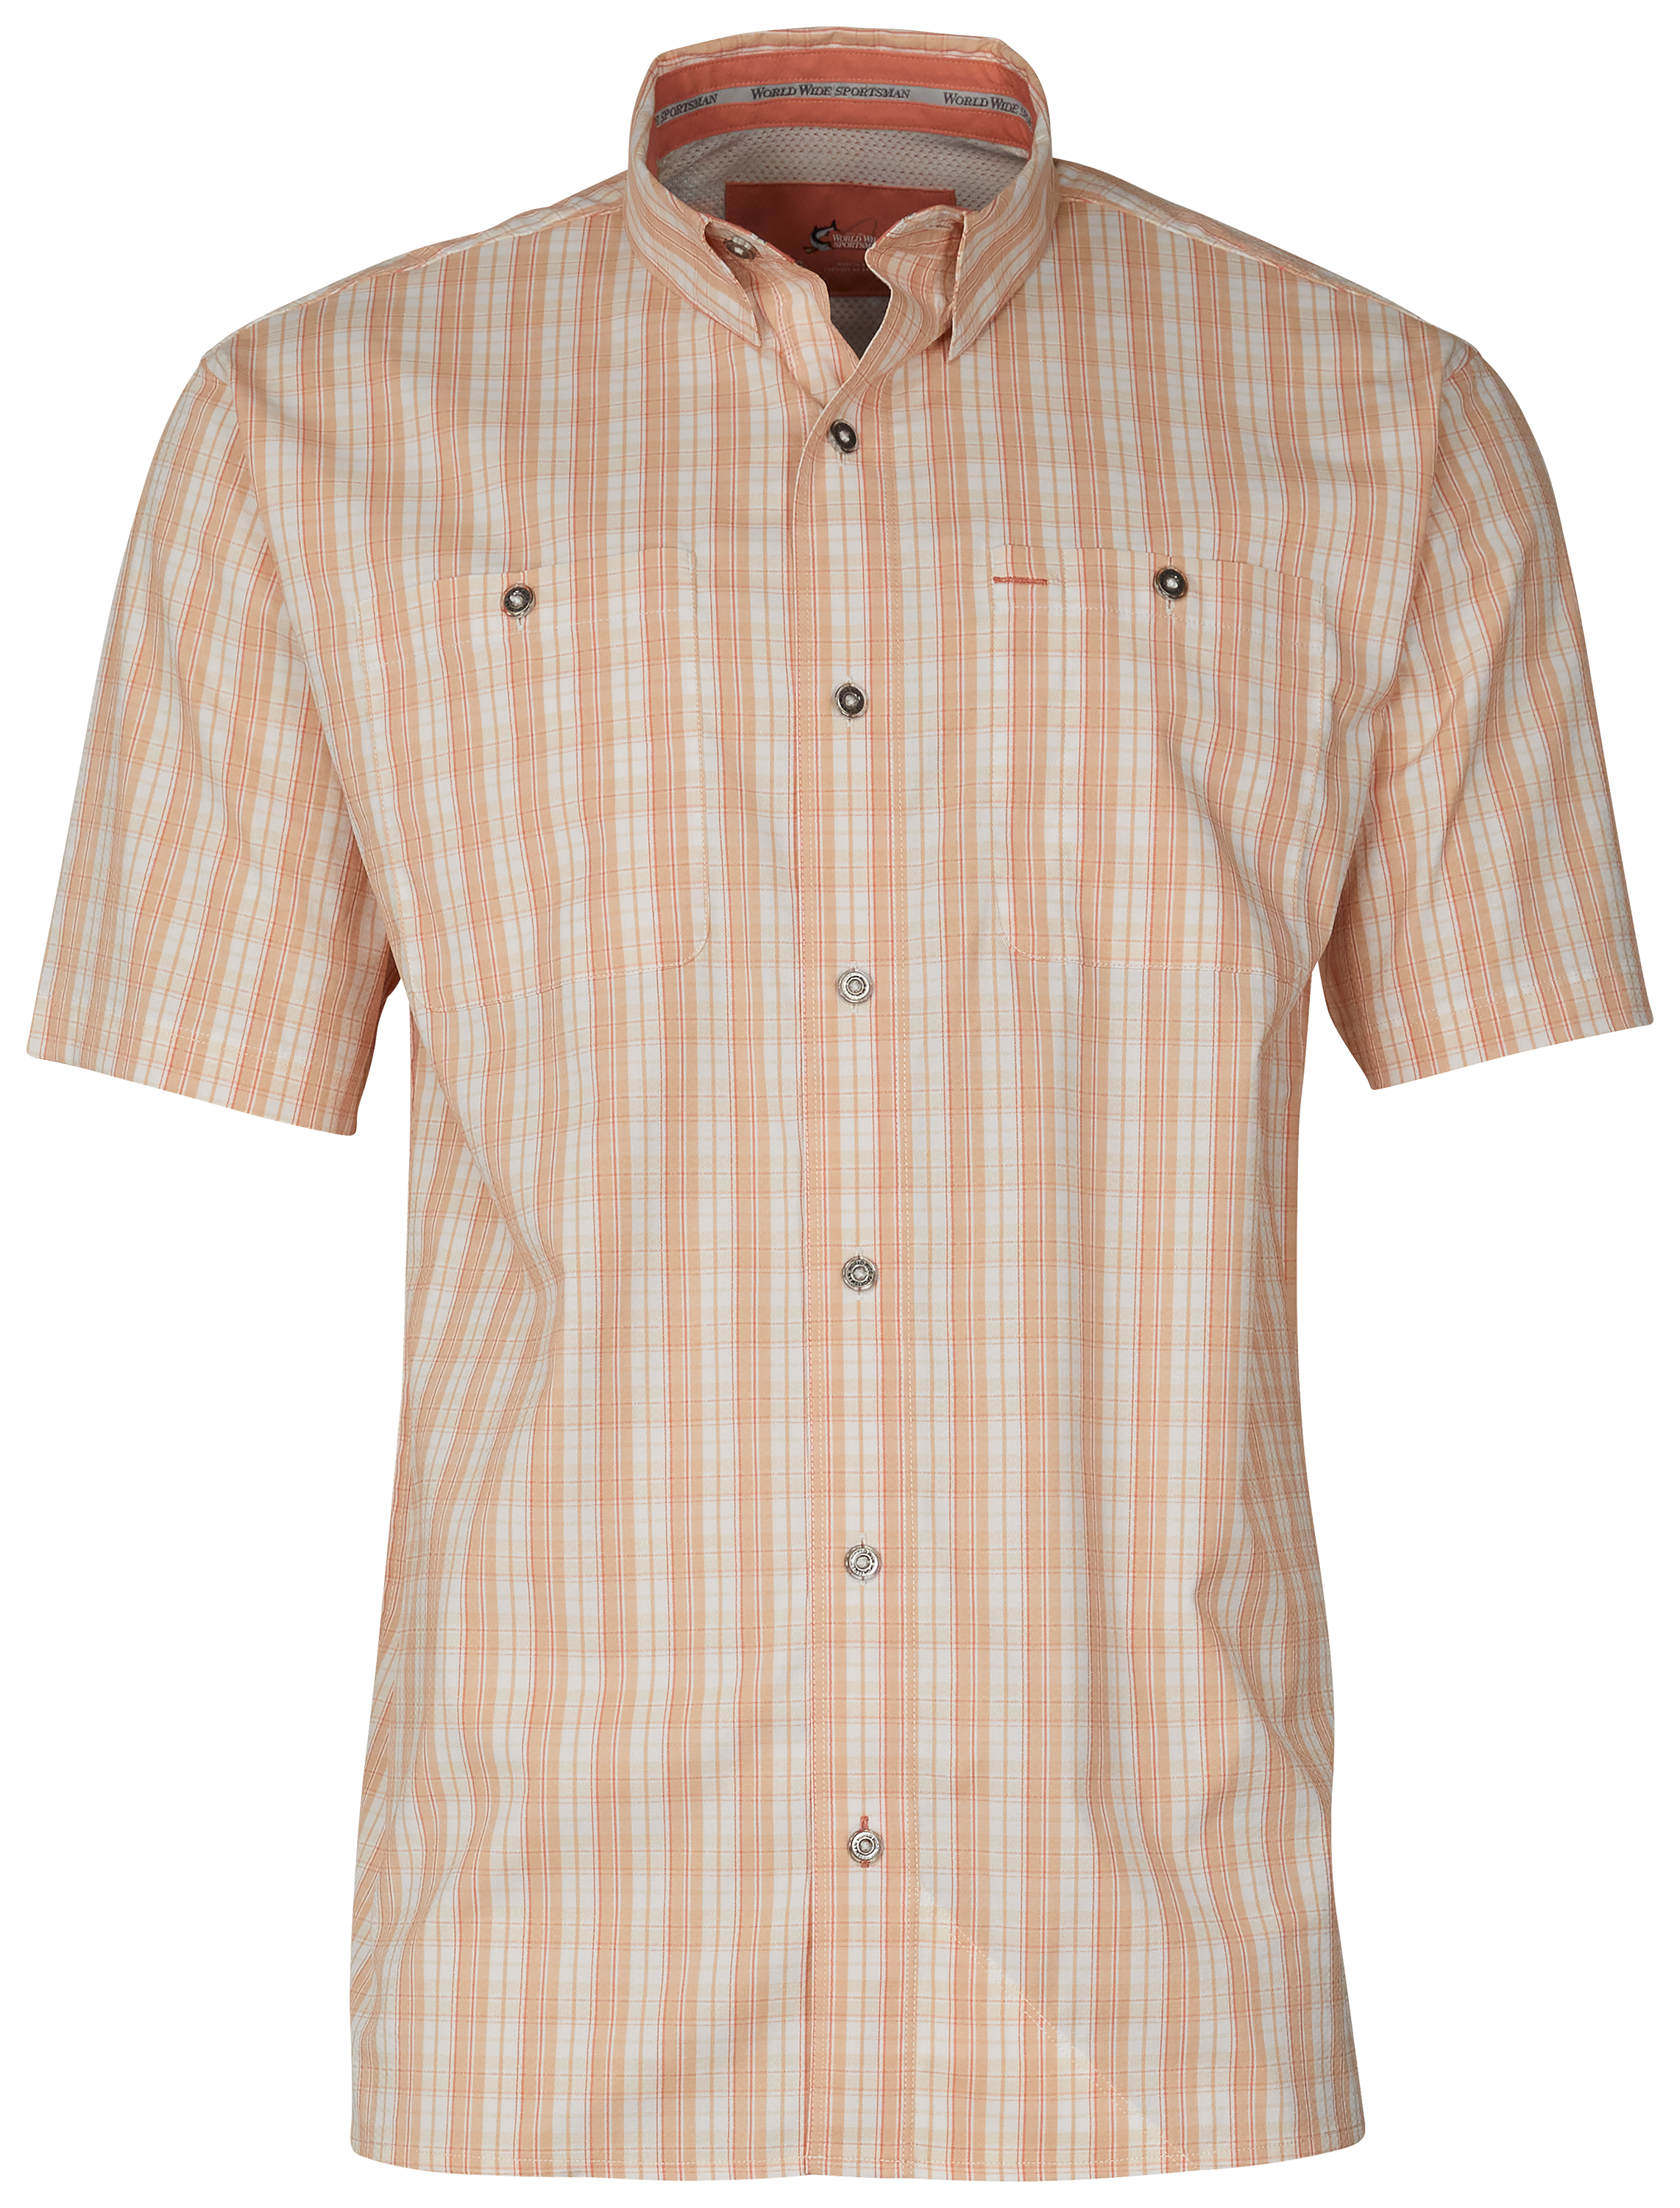 World Wide Sportsman Ultimate Angler Plaid Short-Sleeve Shirt for Men - Almost Apricot Plaid - M